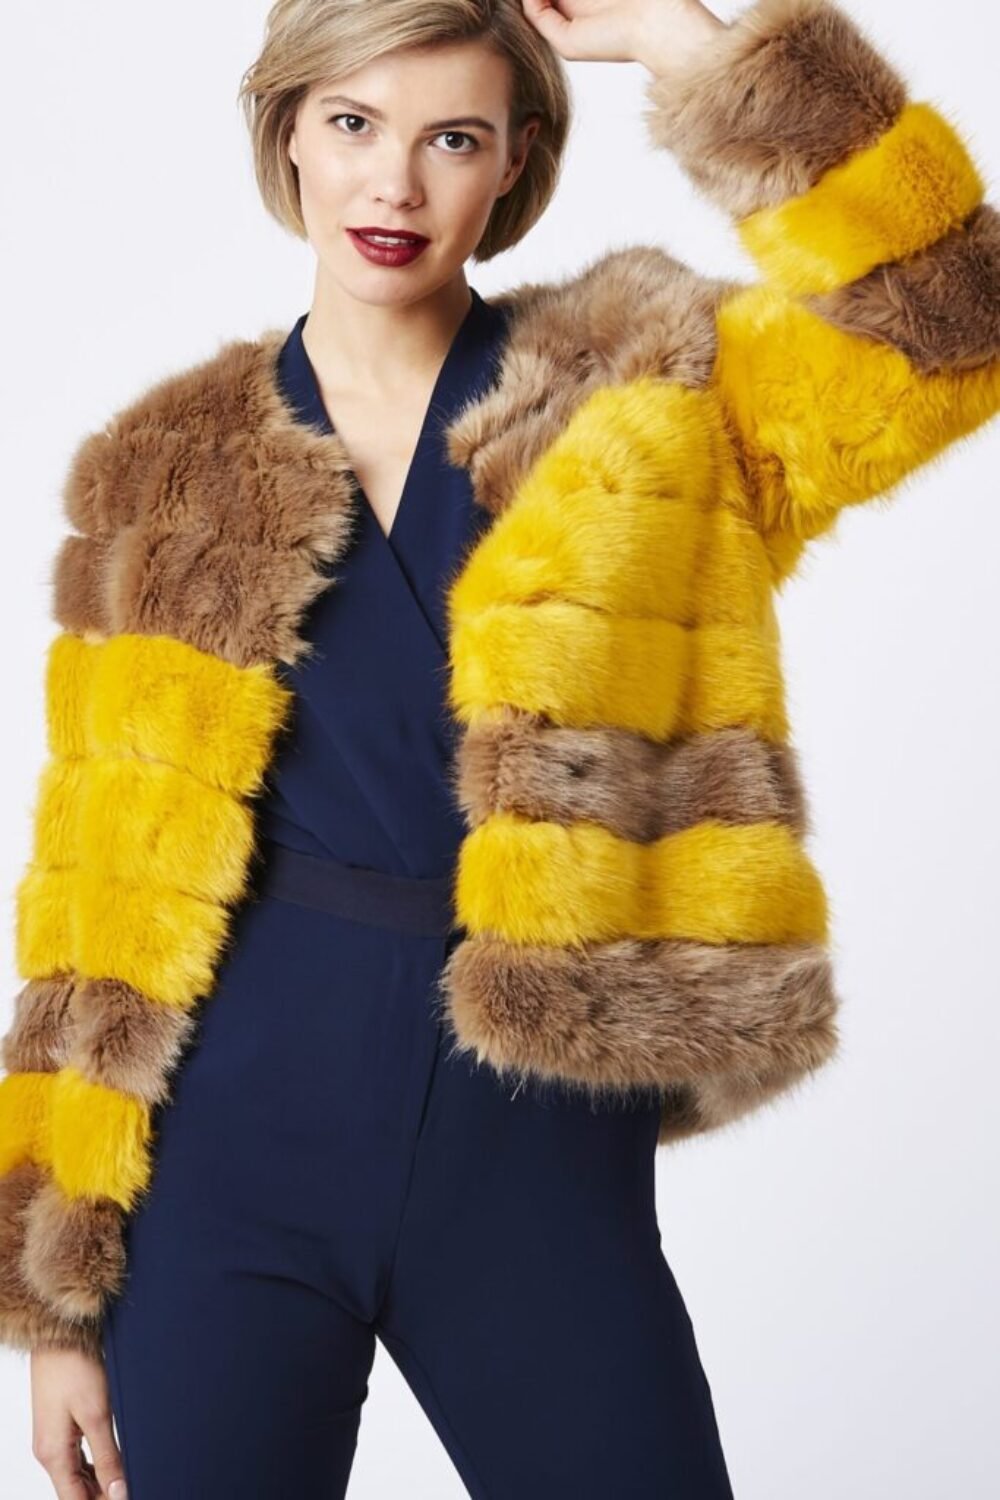 Shop Lux Yellow Emma Coat and women's luxury and designer clothes at www.lux-apparel.co.uk